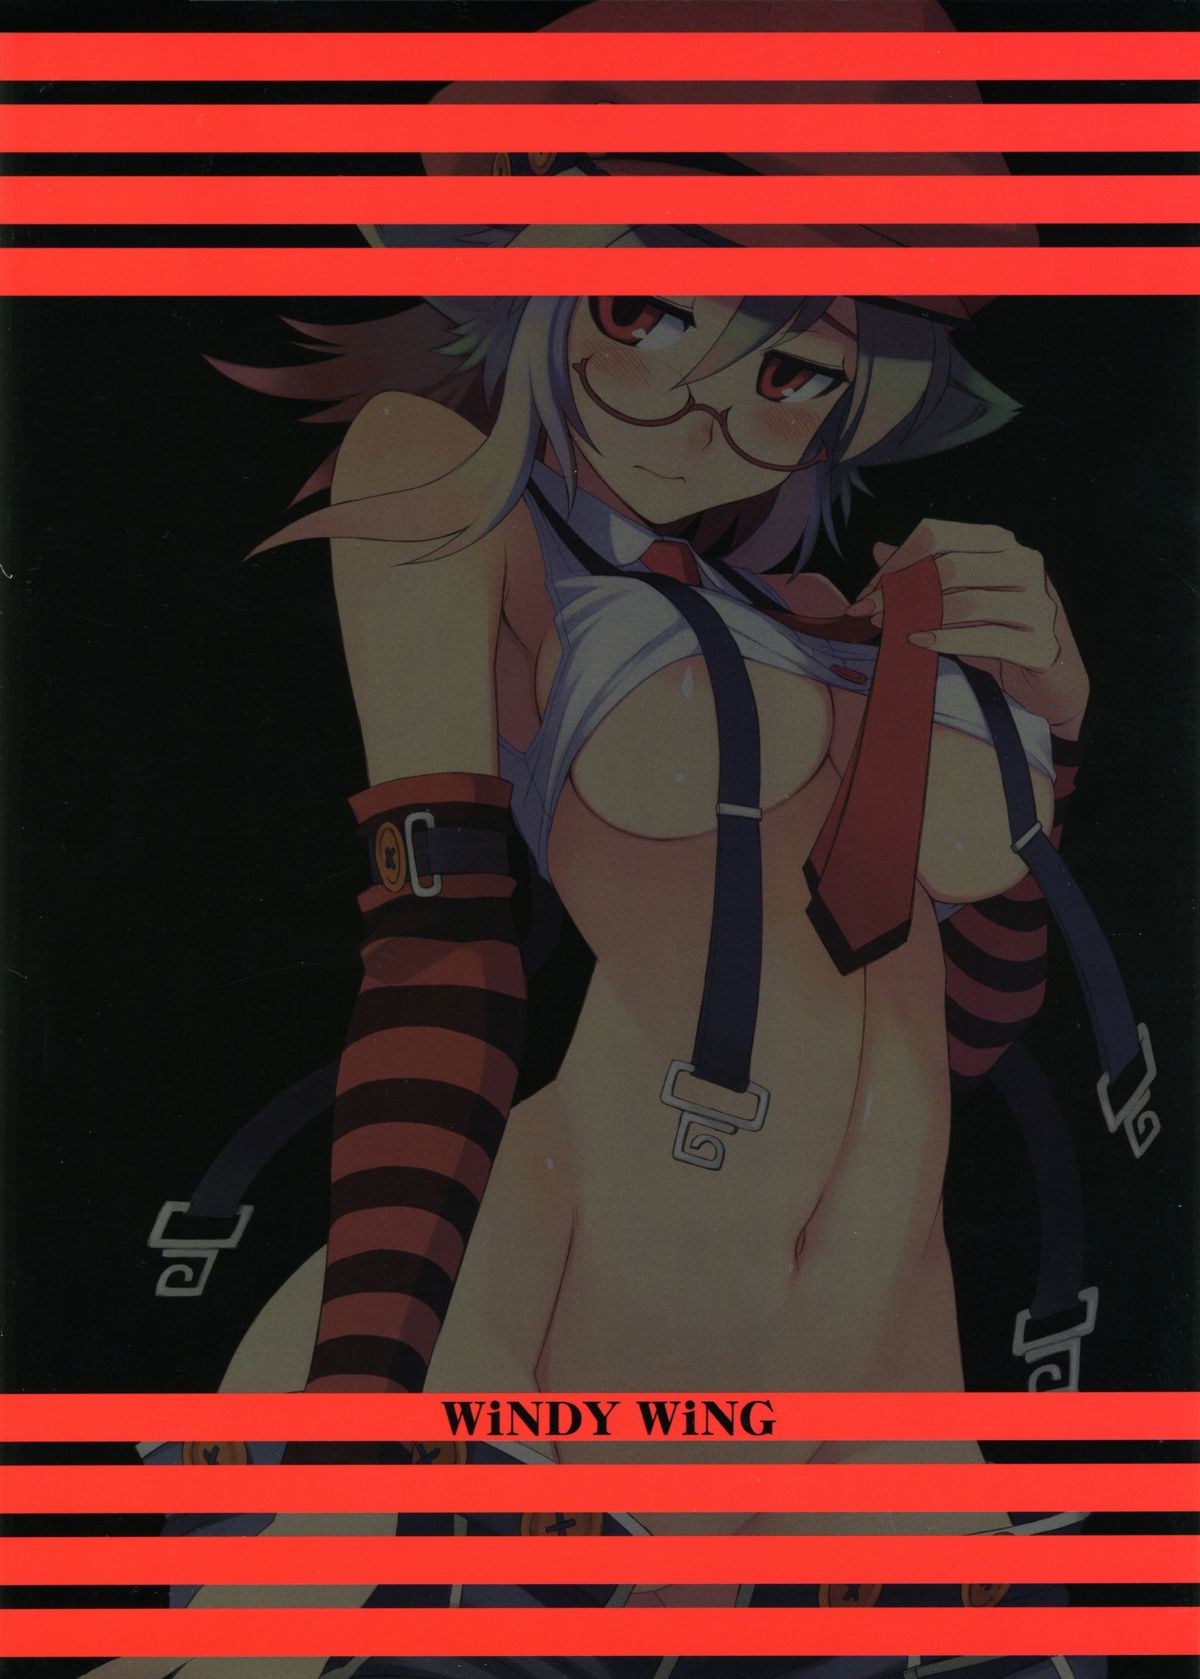 [WiNDY WiNG (草凪蜻蛉)] DiNG DiNG 1 complete!